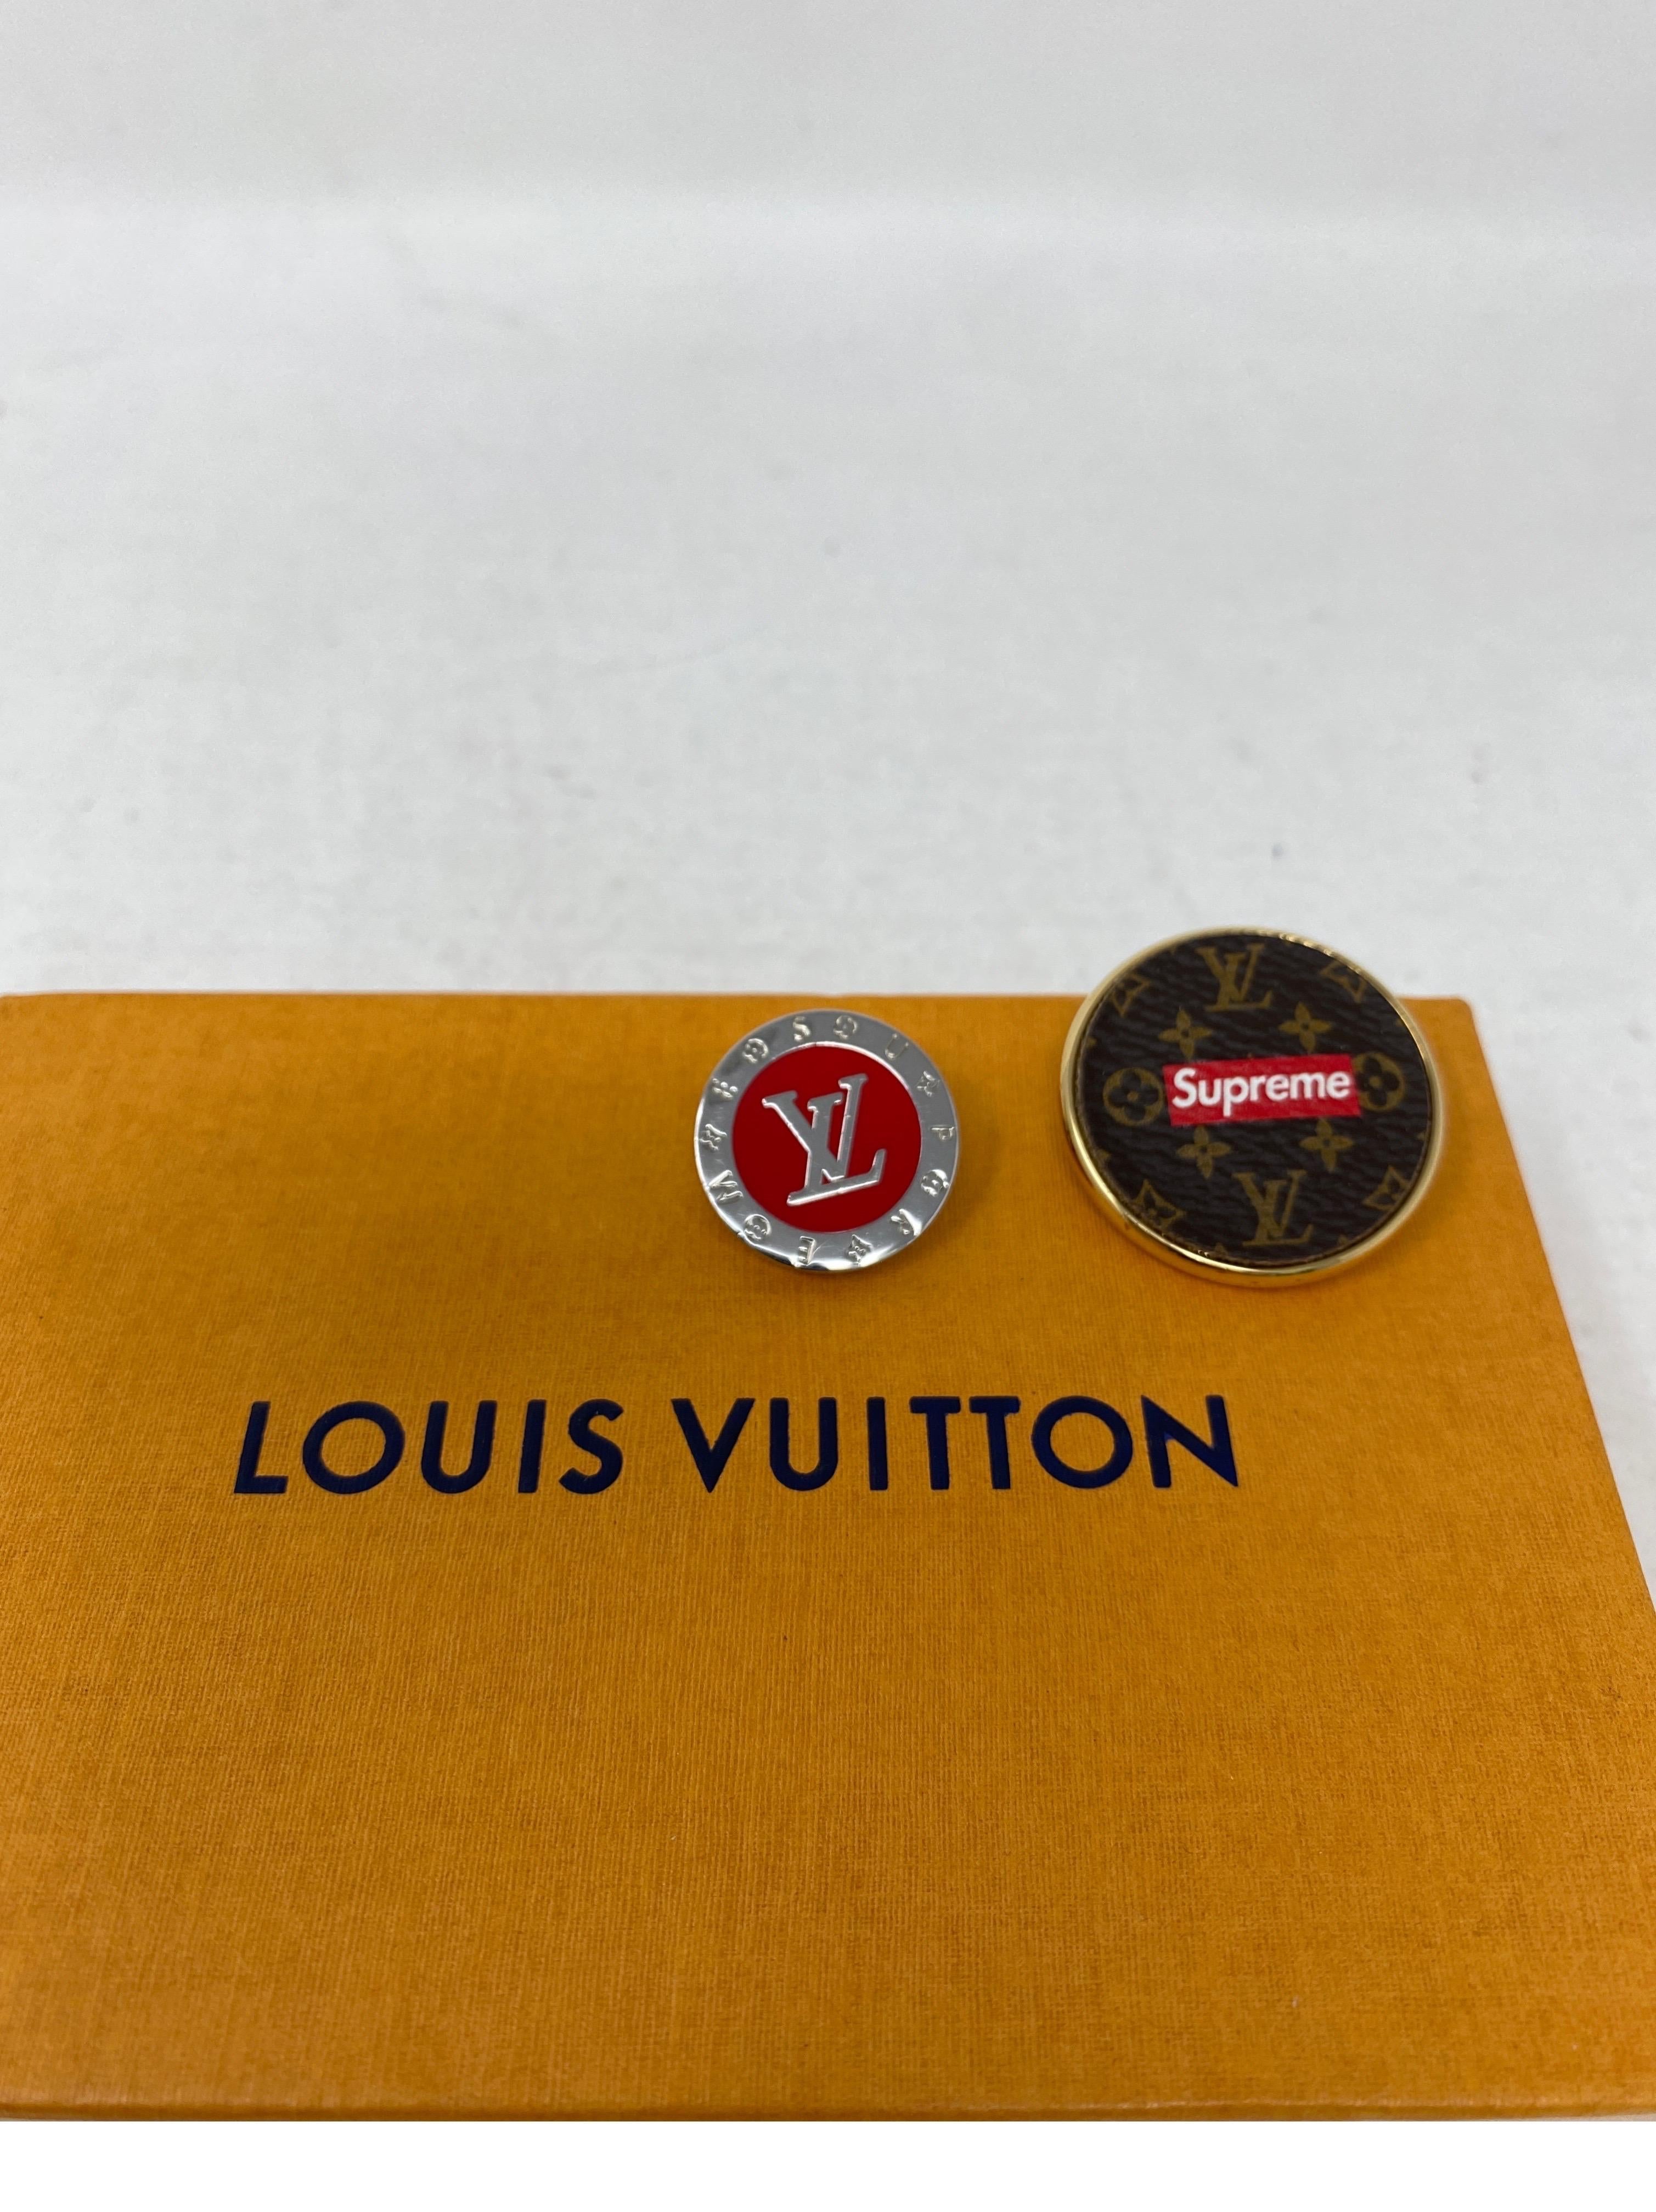 Louis Vuitton Supreme Pin Set. Excellent like new condition. Collector's pieces. Rare and never used. Guaranteed authentic. 